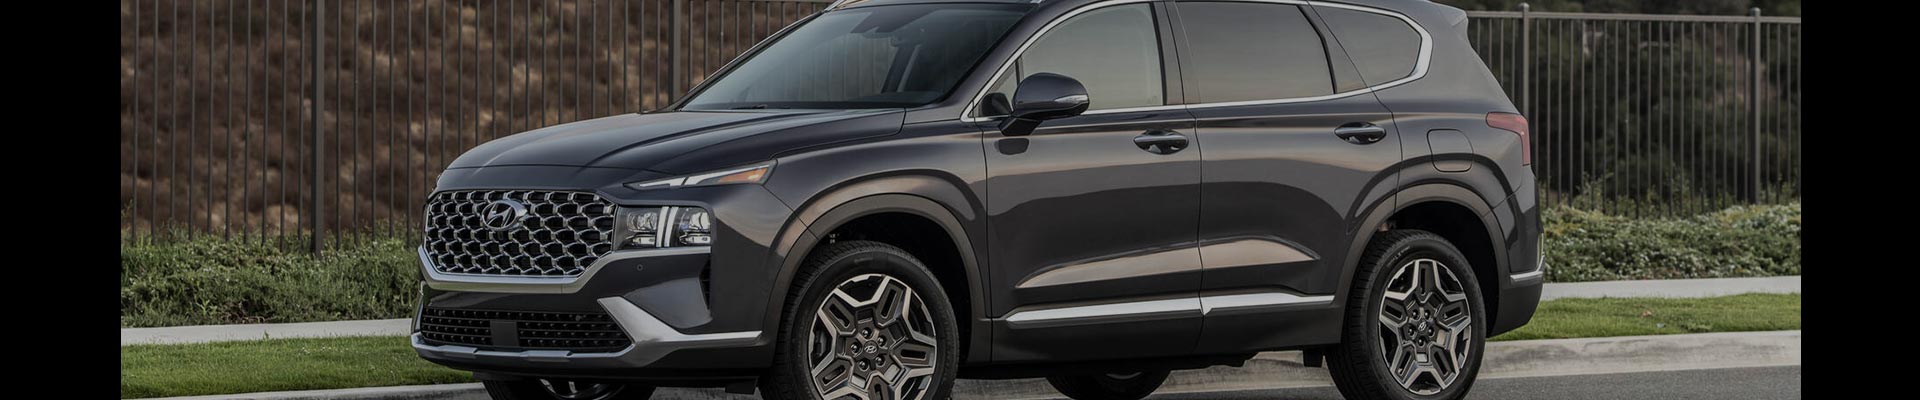 Shop Replacement and OEM 2019 Hyundai Santa Fe Parts with Discounted Price on the Net